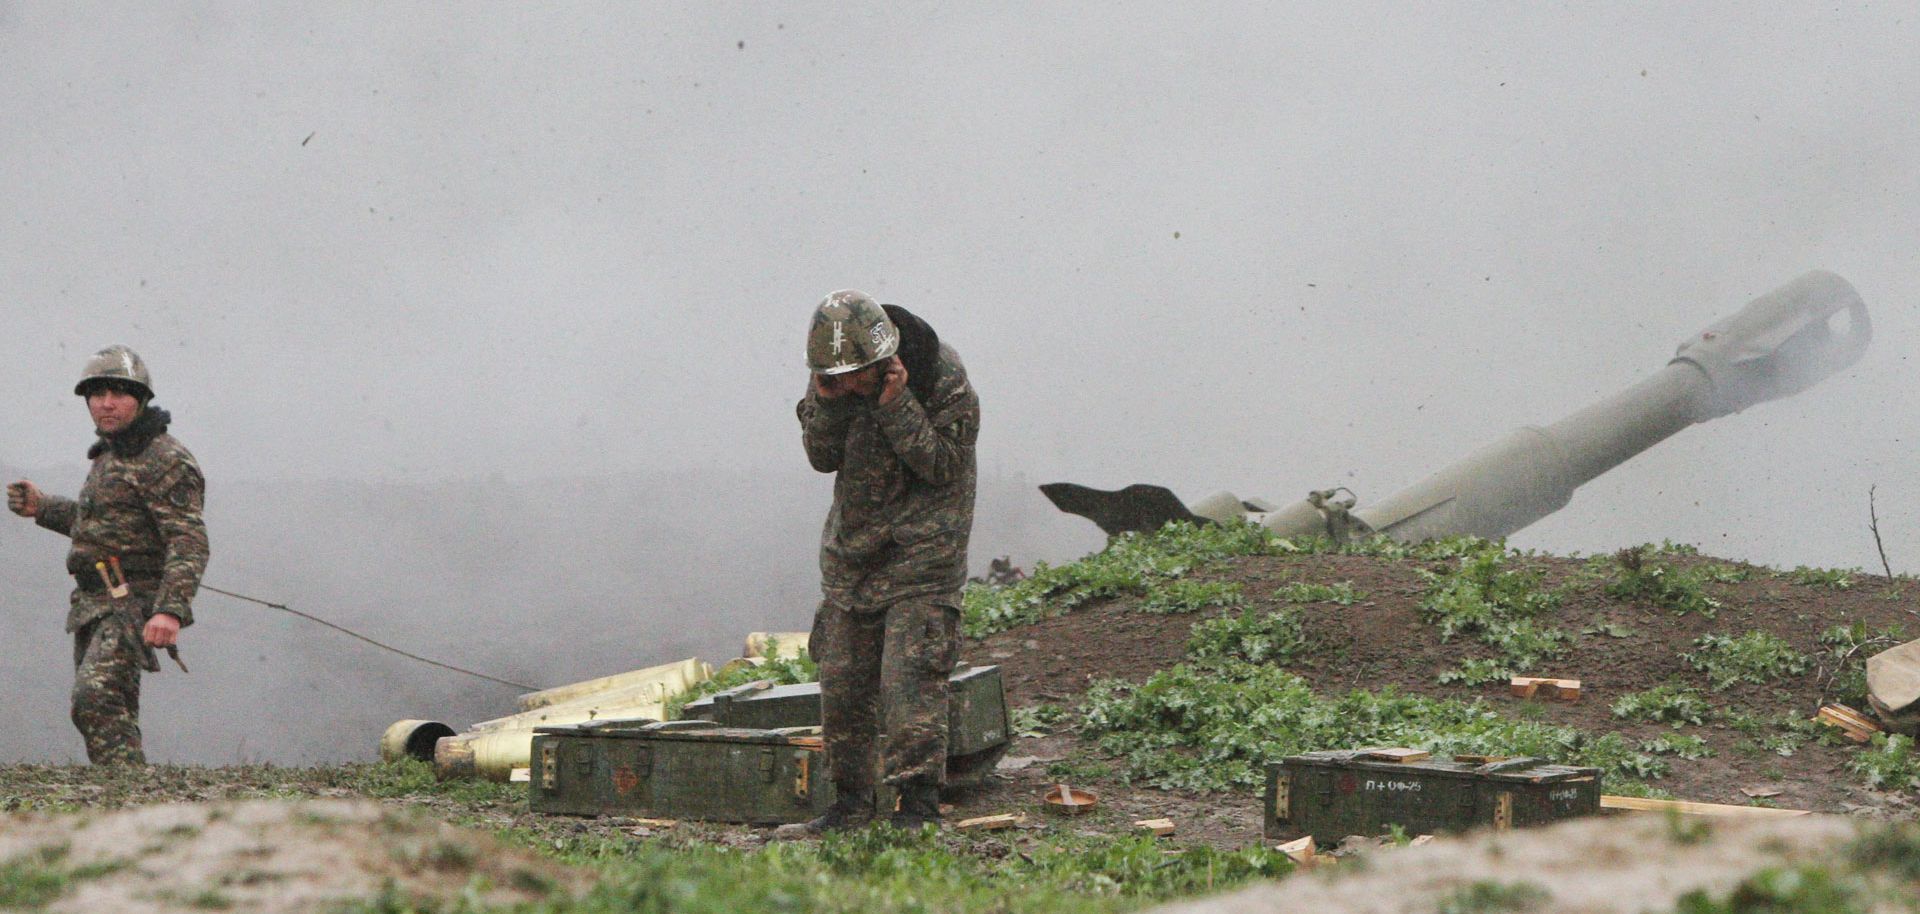 Armenian soldiers belonging to Nagorno-Karabakh's army fire an artillery shell toward Azerbaijani forces on April 3.